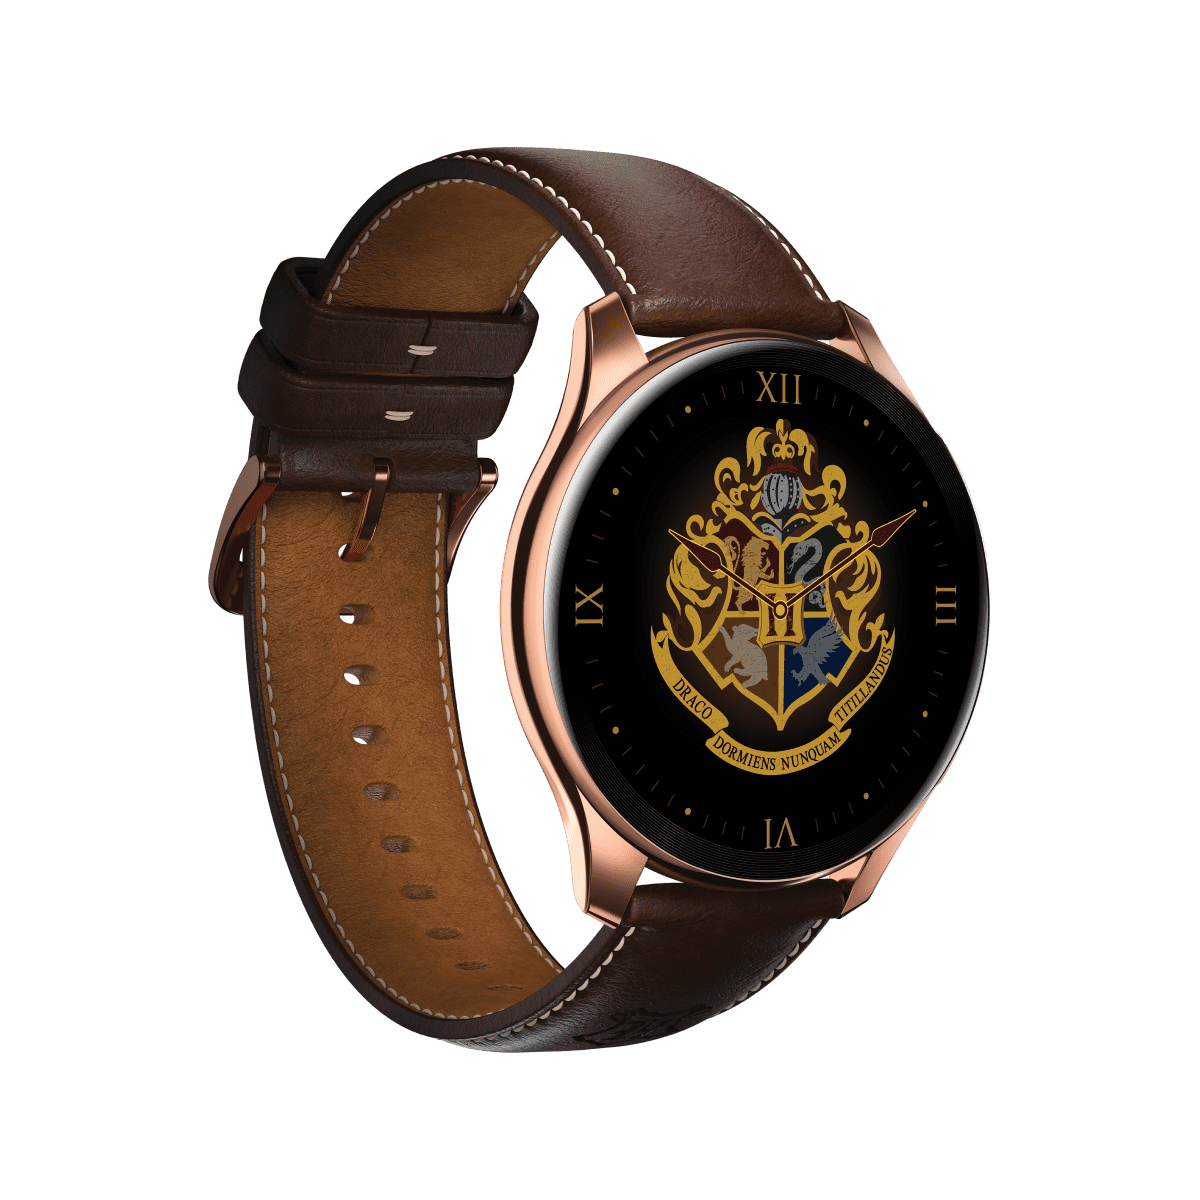 OnePlus Watch Harry Potter Limited Edition: Unboxing, Photo